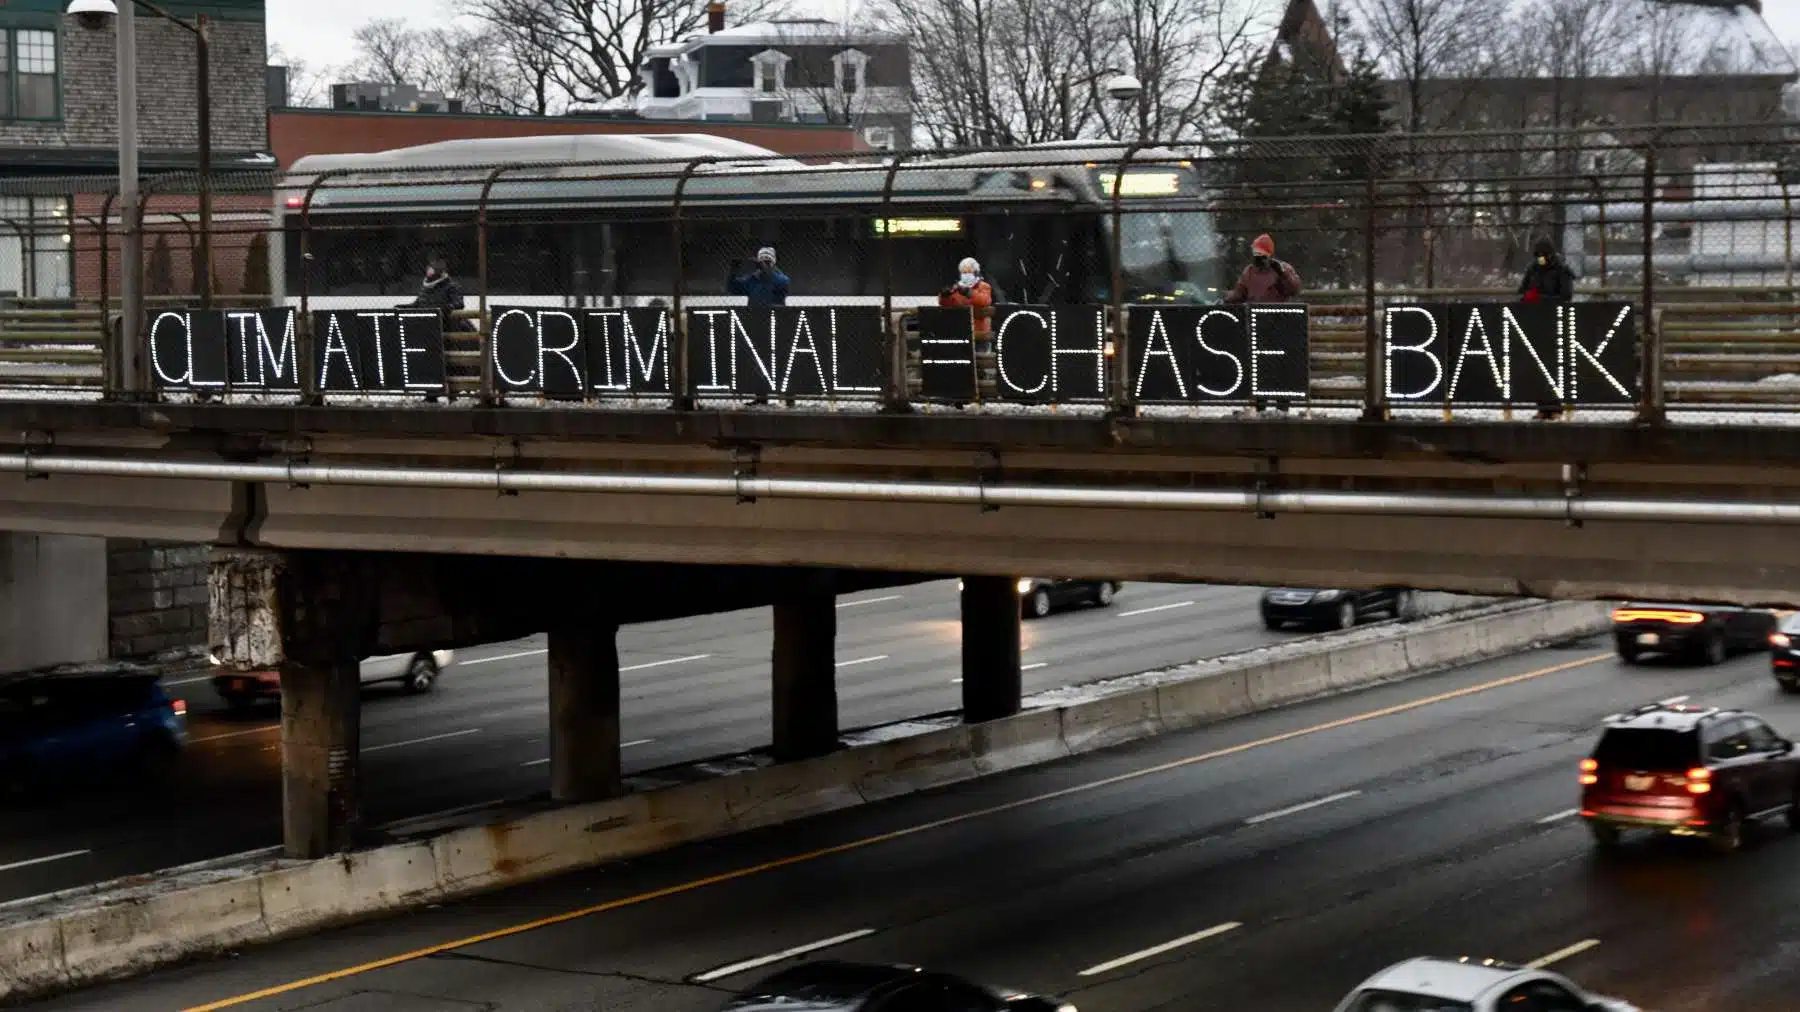 Rhode Island News: CLIMATE CRIMINAL = CHASE BANK says Climate Action Rhode Island